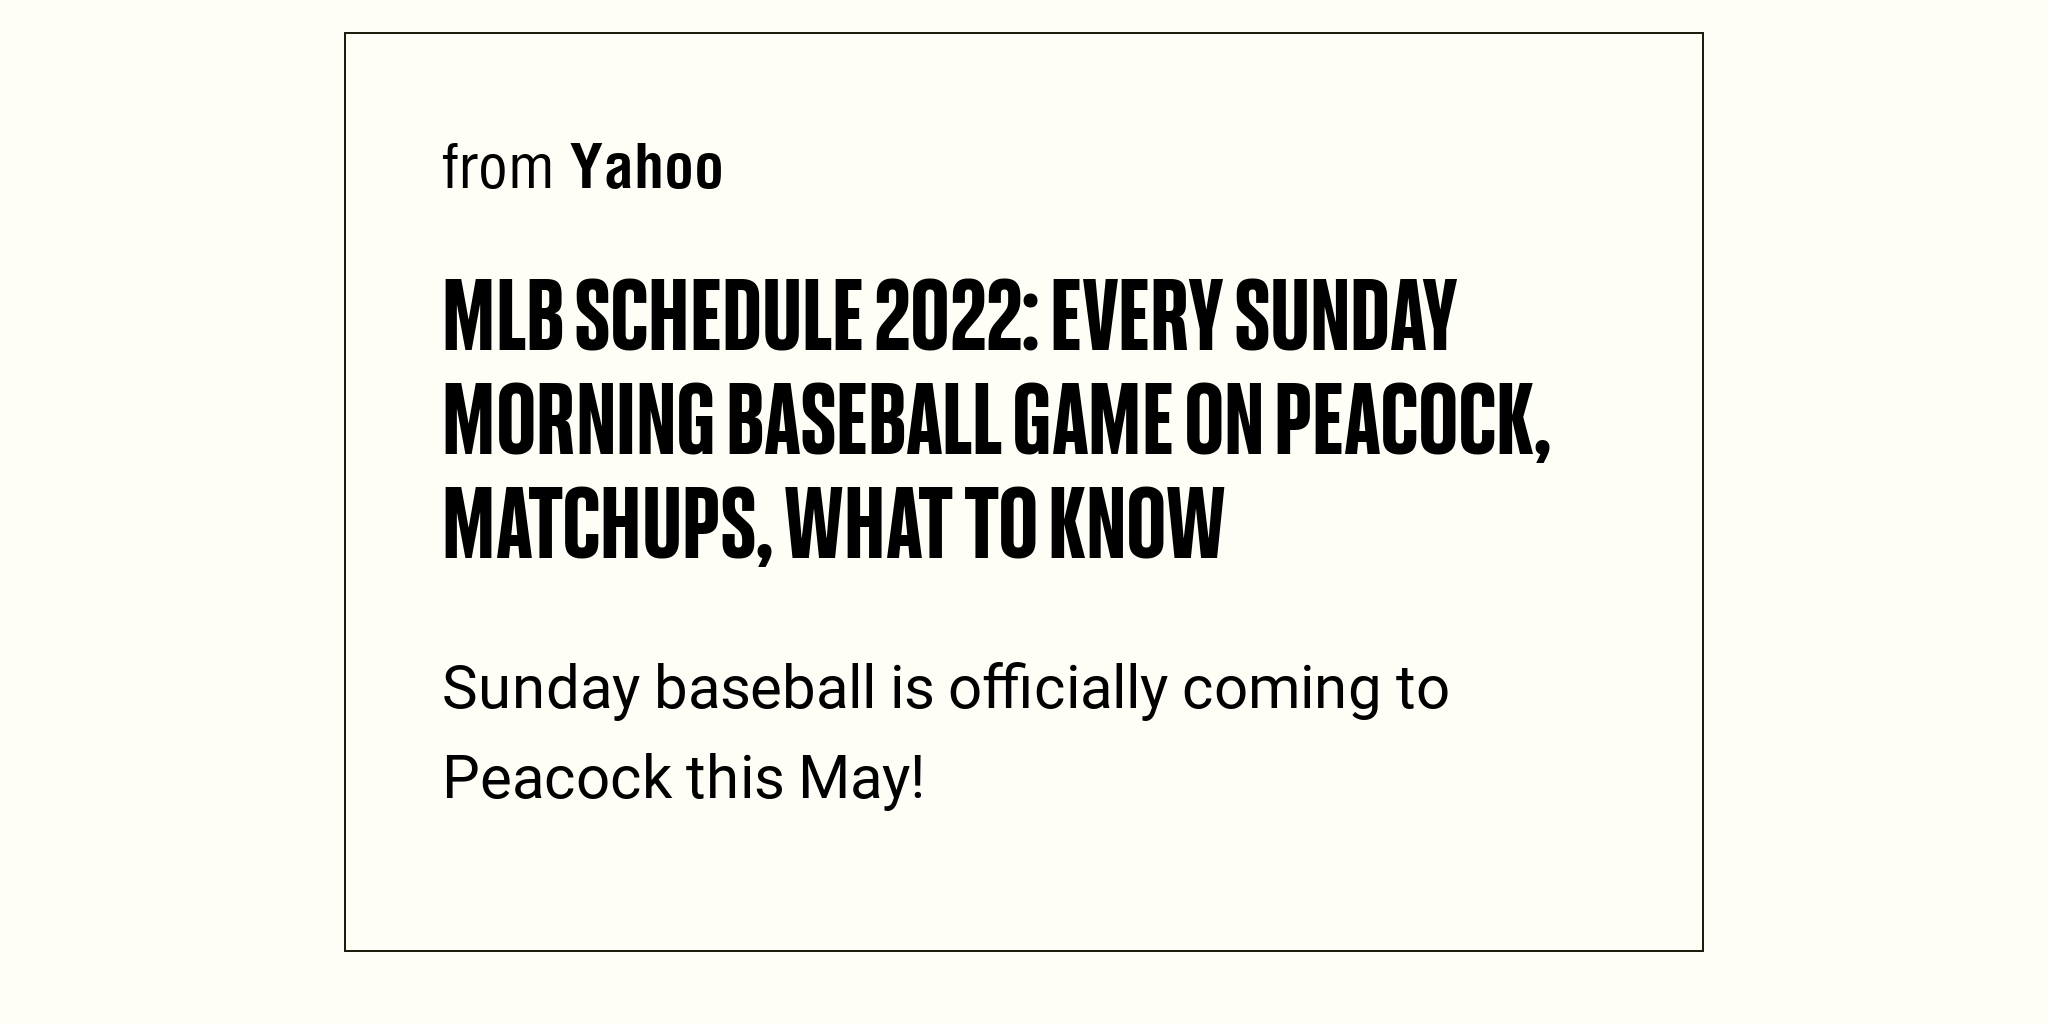 MLB schedule 2022 Every Sunday morning baseball game on Peacock